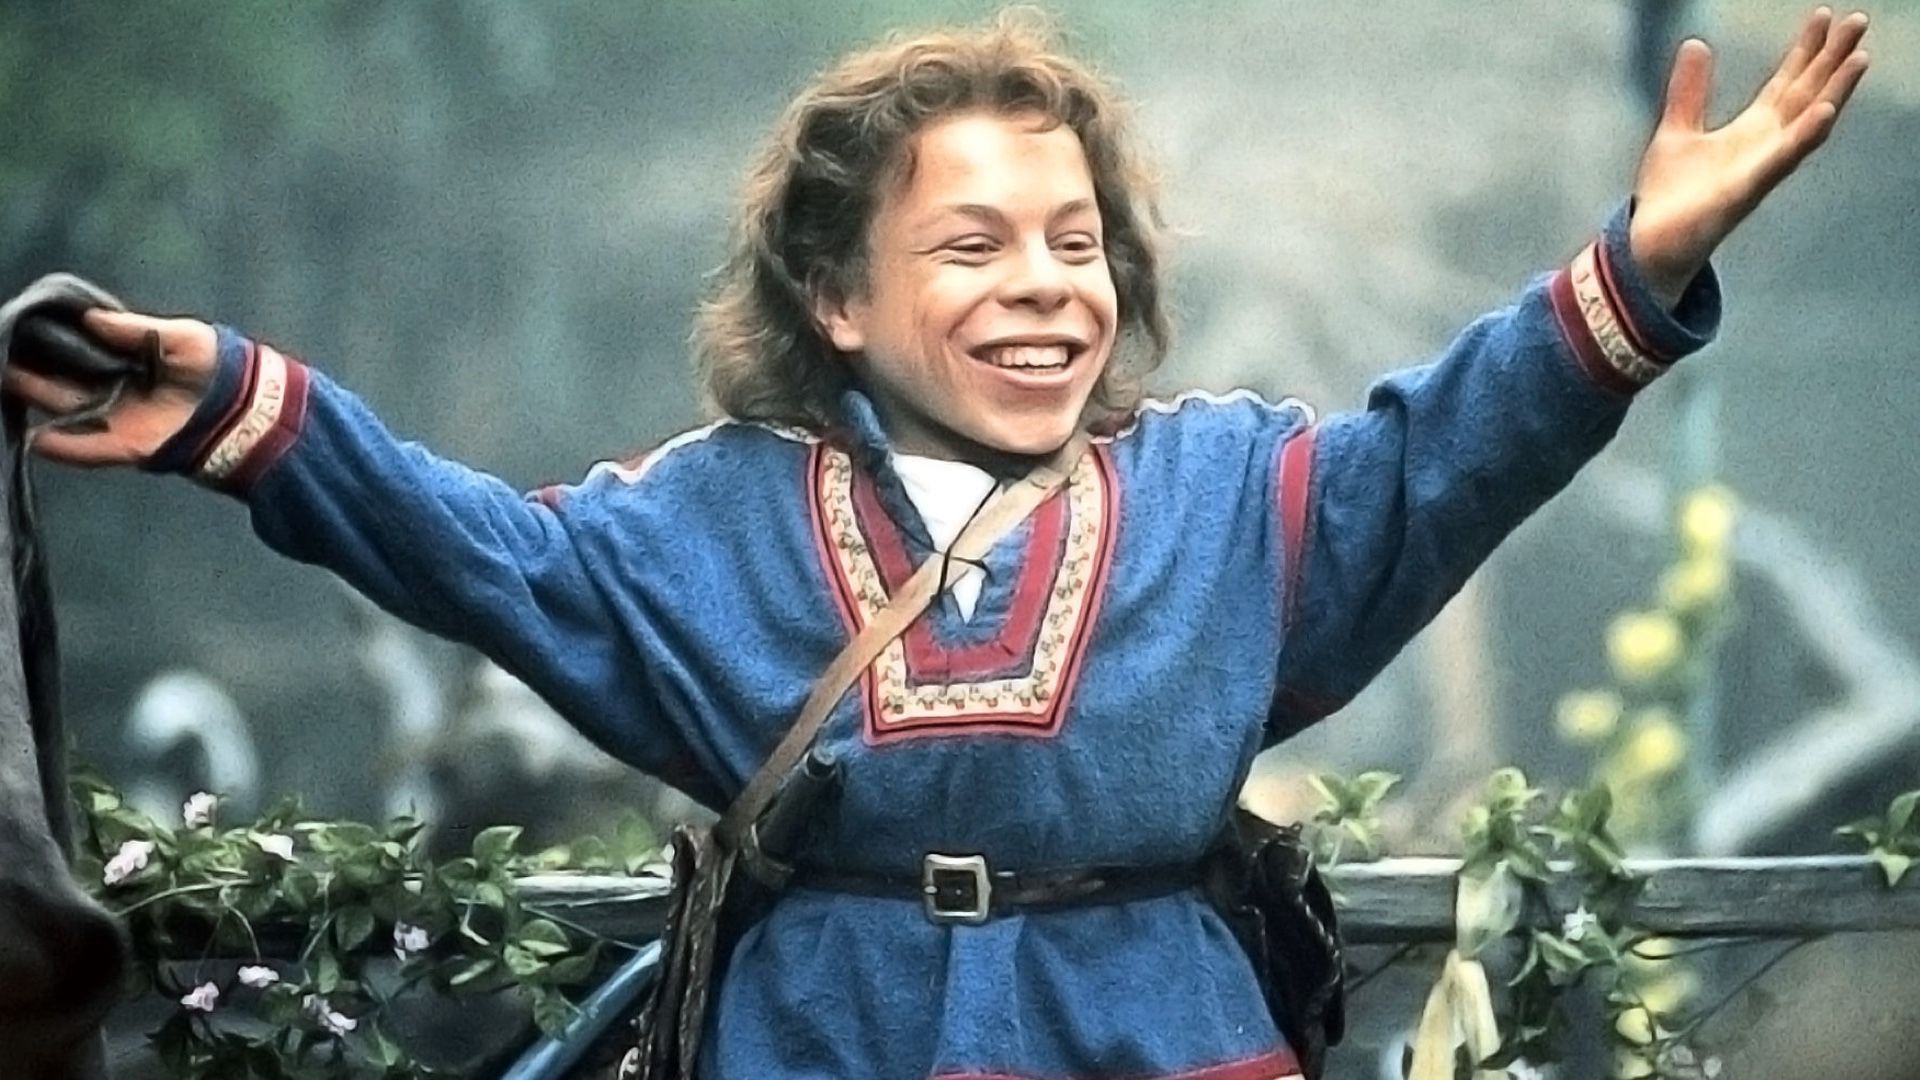 Willow might be coming back as a TV series on Disneys streaming service